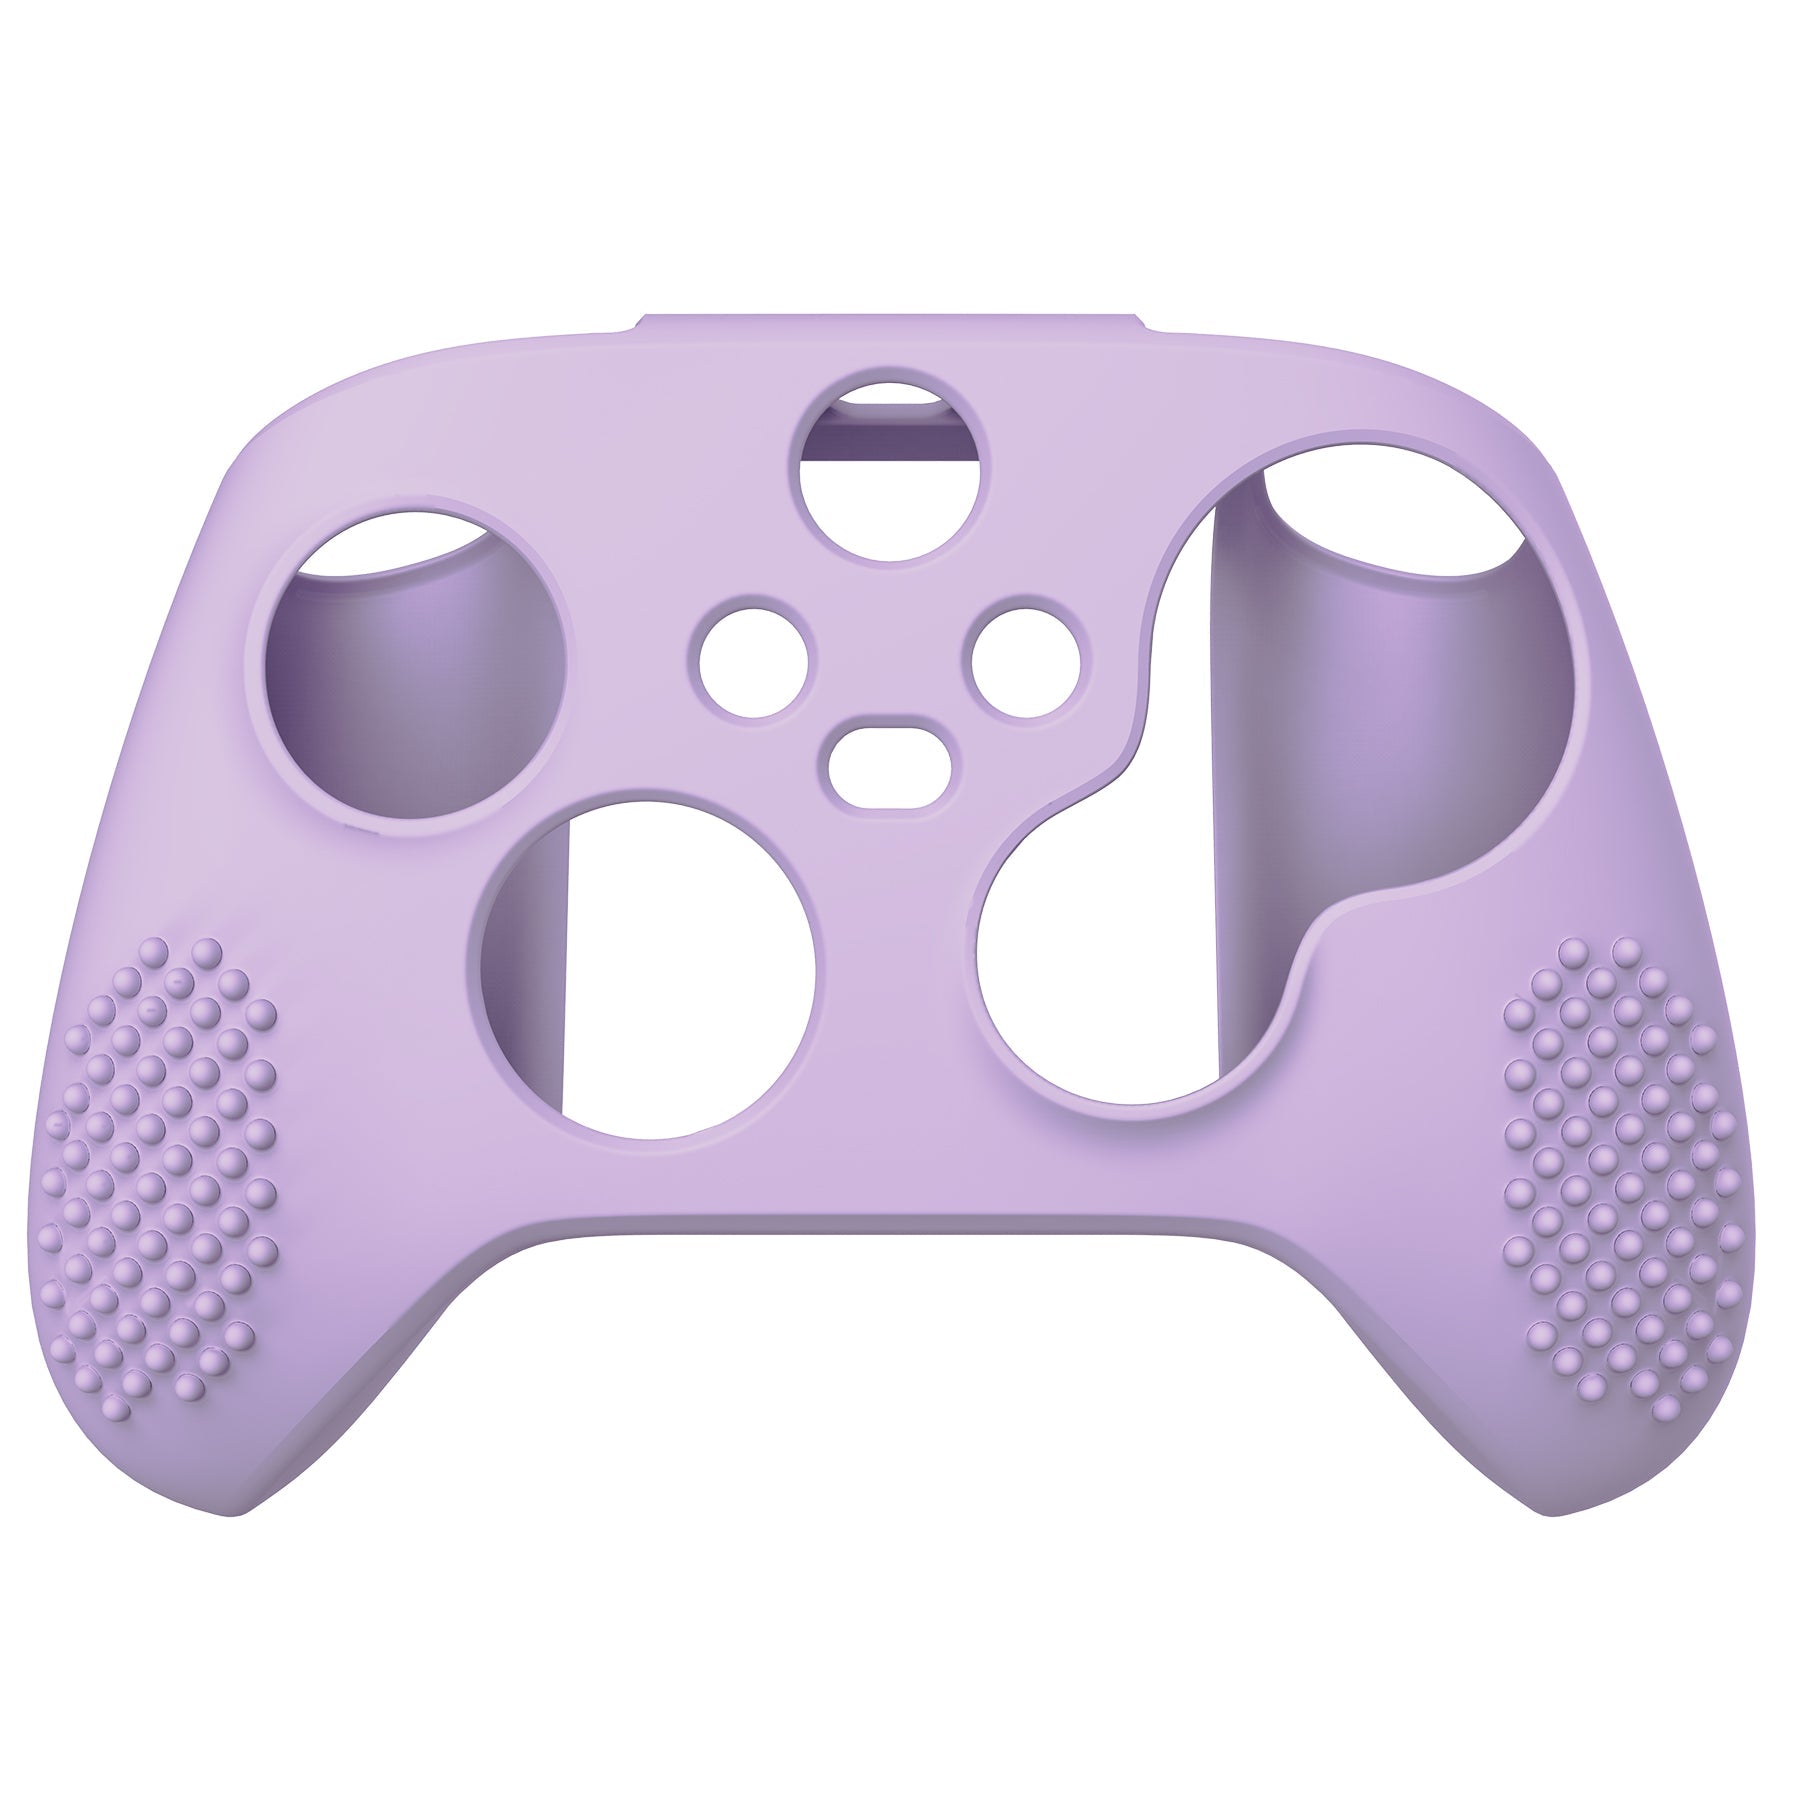 PlayVital Mauve Purple 3D Studded Edition Anti-slip Silicone Cover Skin for Xbox Series X Controller, Soft Rubber Case Protector for Xbox Series S Controller with 6 Black Thumb Grip Caps - SDX3009 PlayVital